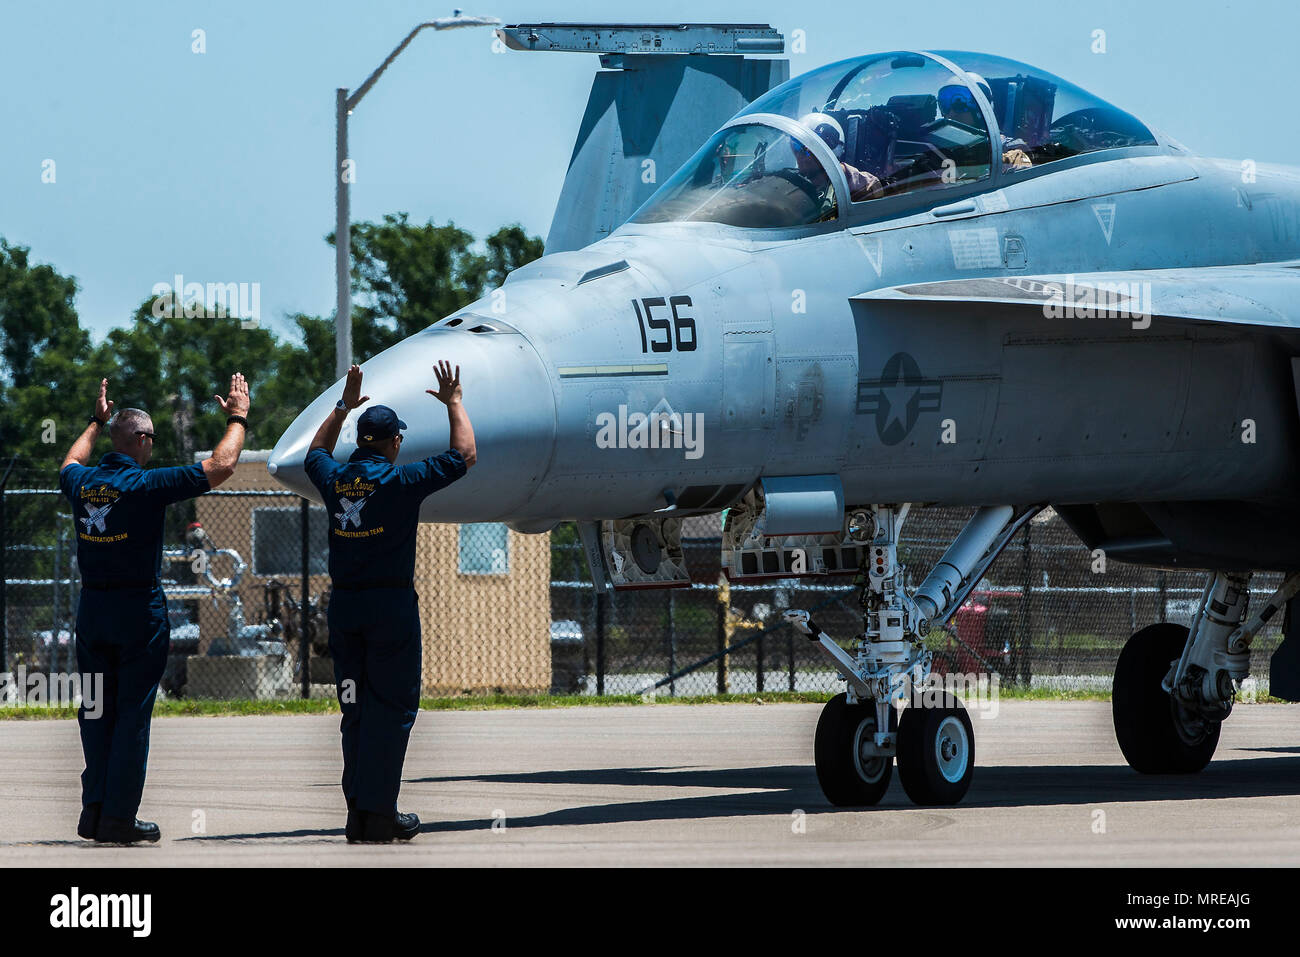 Members of the U.S. Navy Tactical Demonstration Team check the outer exterior of the F-18 Super Hornet before take off during the 100th Centennial Celebration Air Show, June 10, 2017, at Scott Air Force Base, Ill. Boeing offers a suite of upgrades to the F/A-18 Super Hornet, including conformal fuel tanks, an enclosed weapons pod, an enhanced engine and a reduced radar signature. These capabilities, along with other advanced technologies, offer U.S. and international customers a menu of next-generation capabilities to outpace future threats affordably. (U.S. Air Force photo/Senior Airman Trist Stock Photo